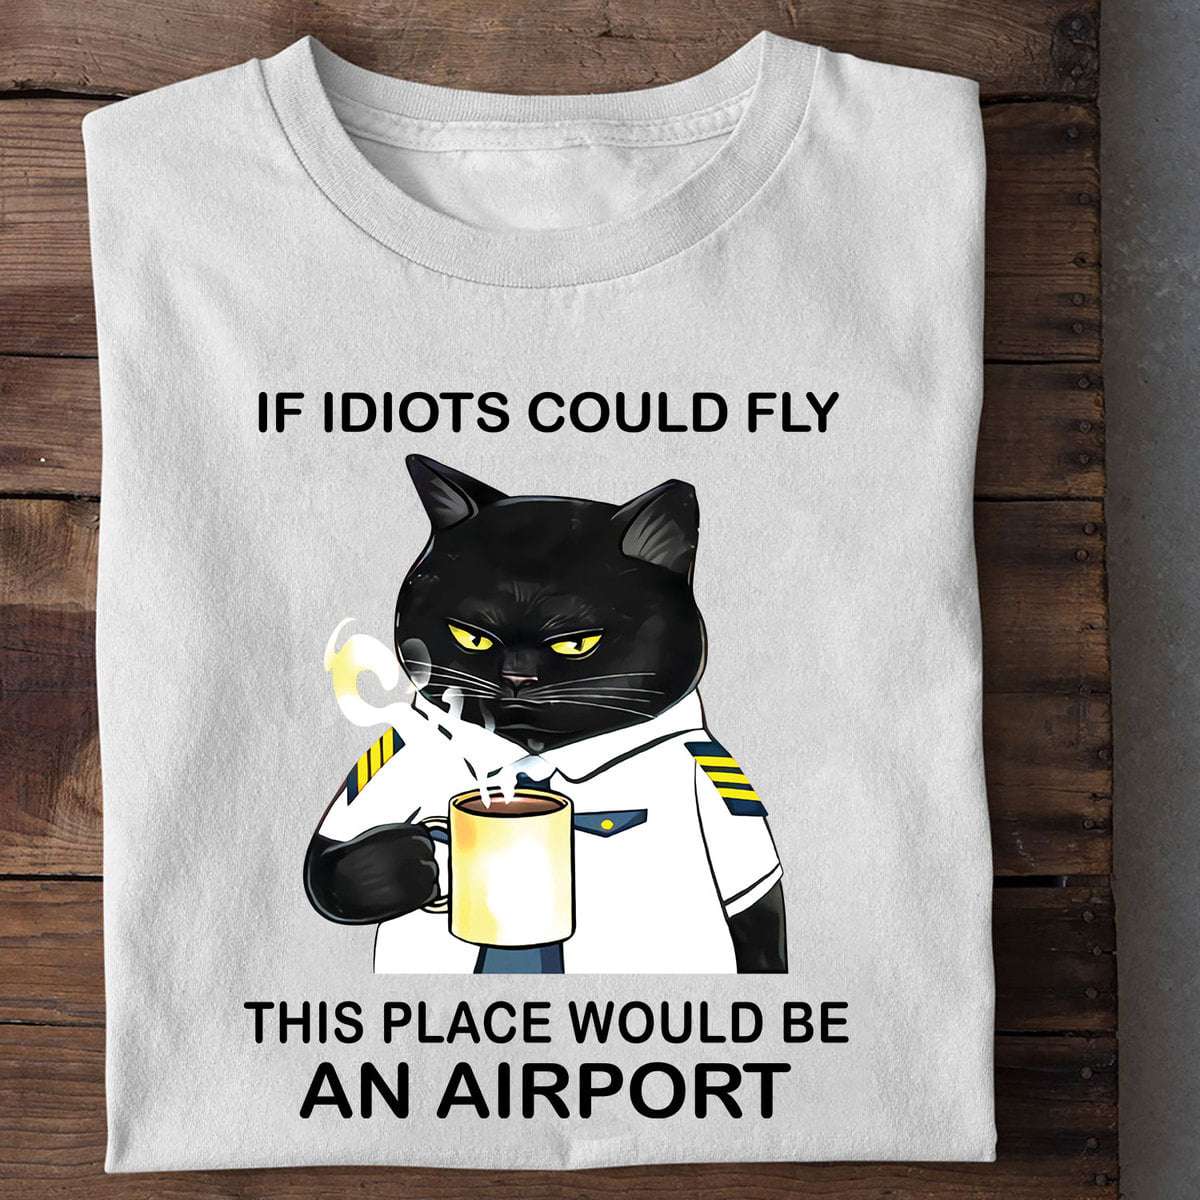 If idiots could fly, this place would be an airport - Black cat drinking coffee, black cat pilot, pilot the job